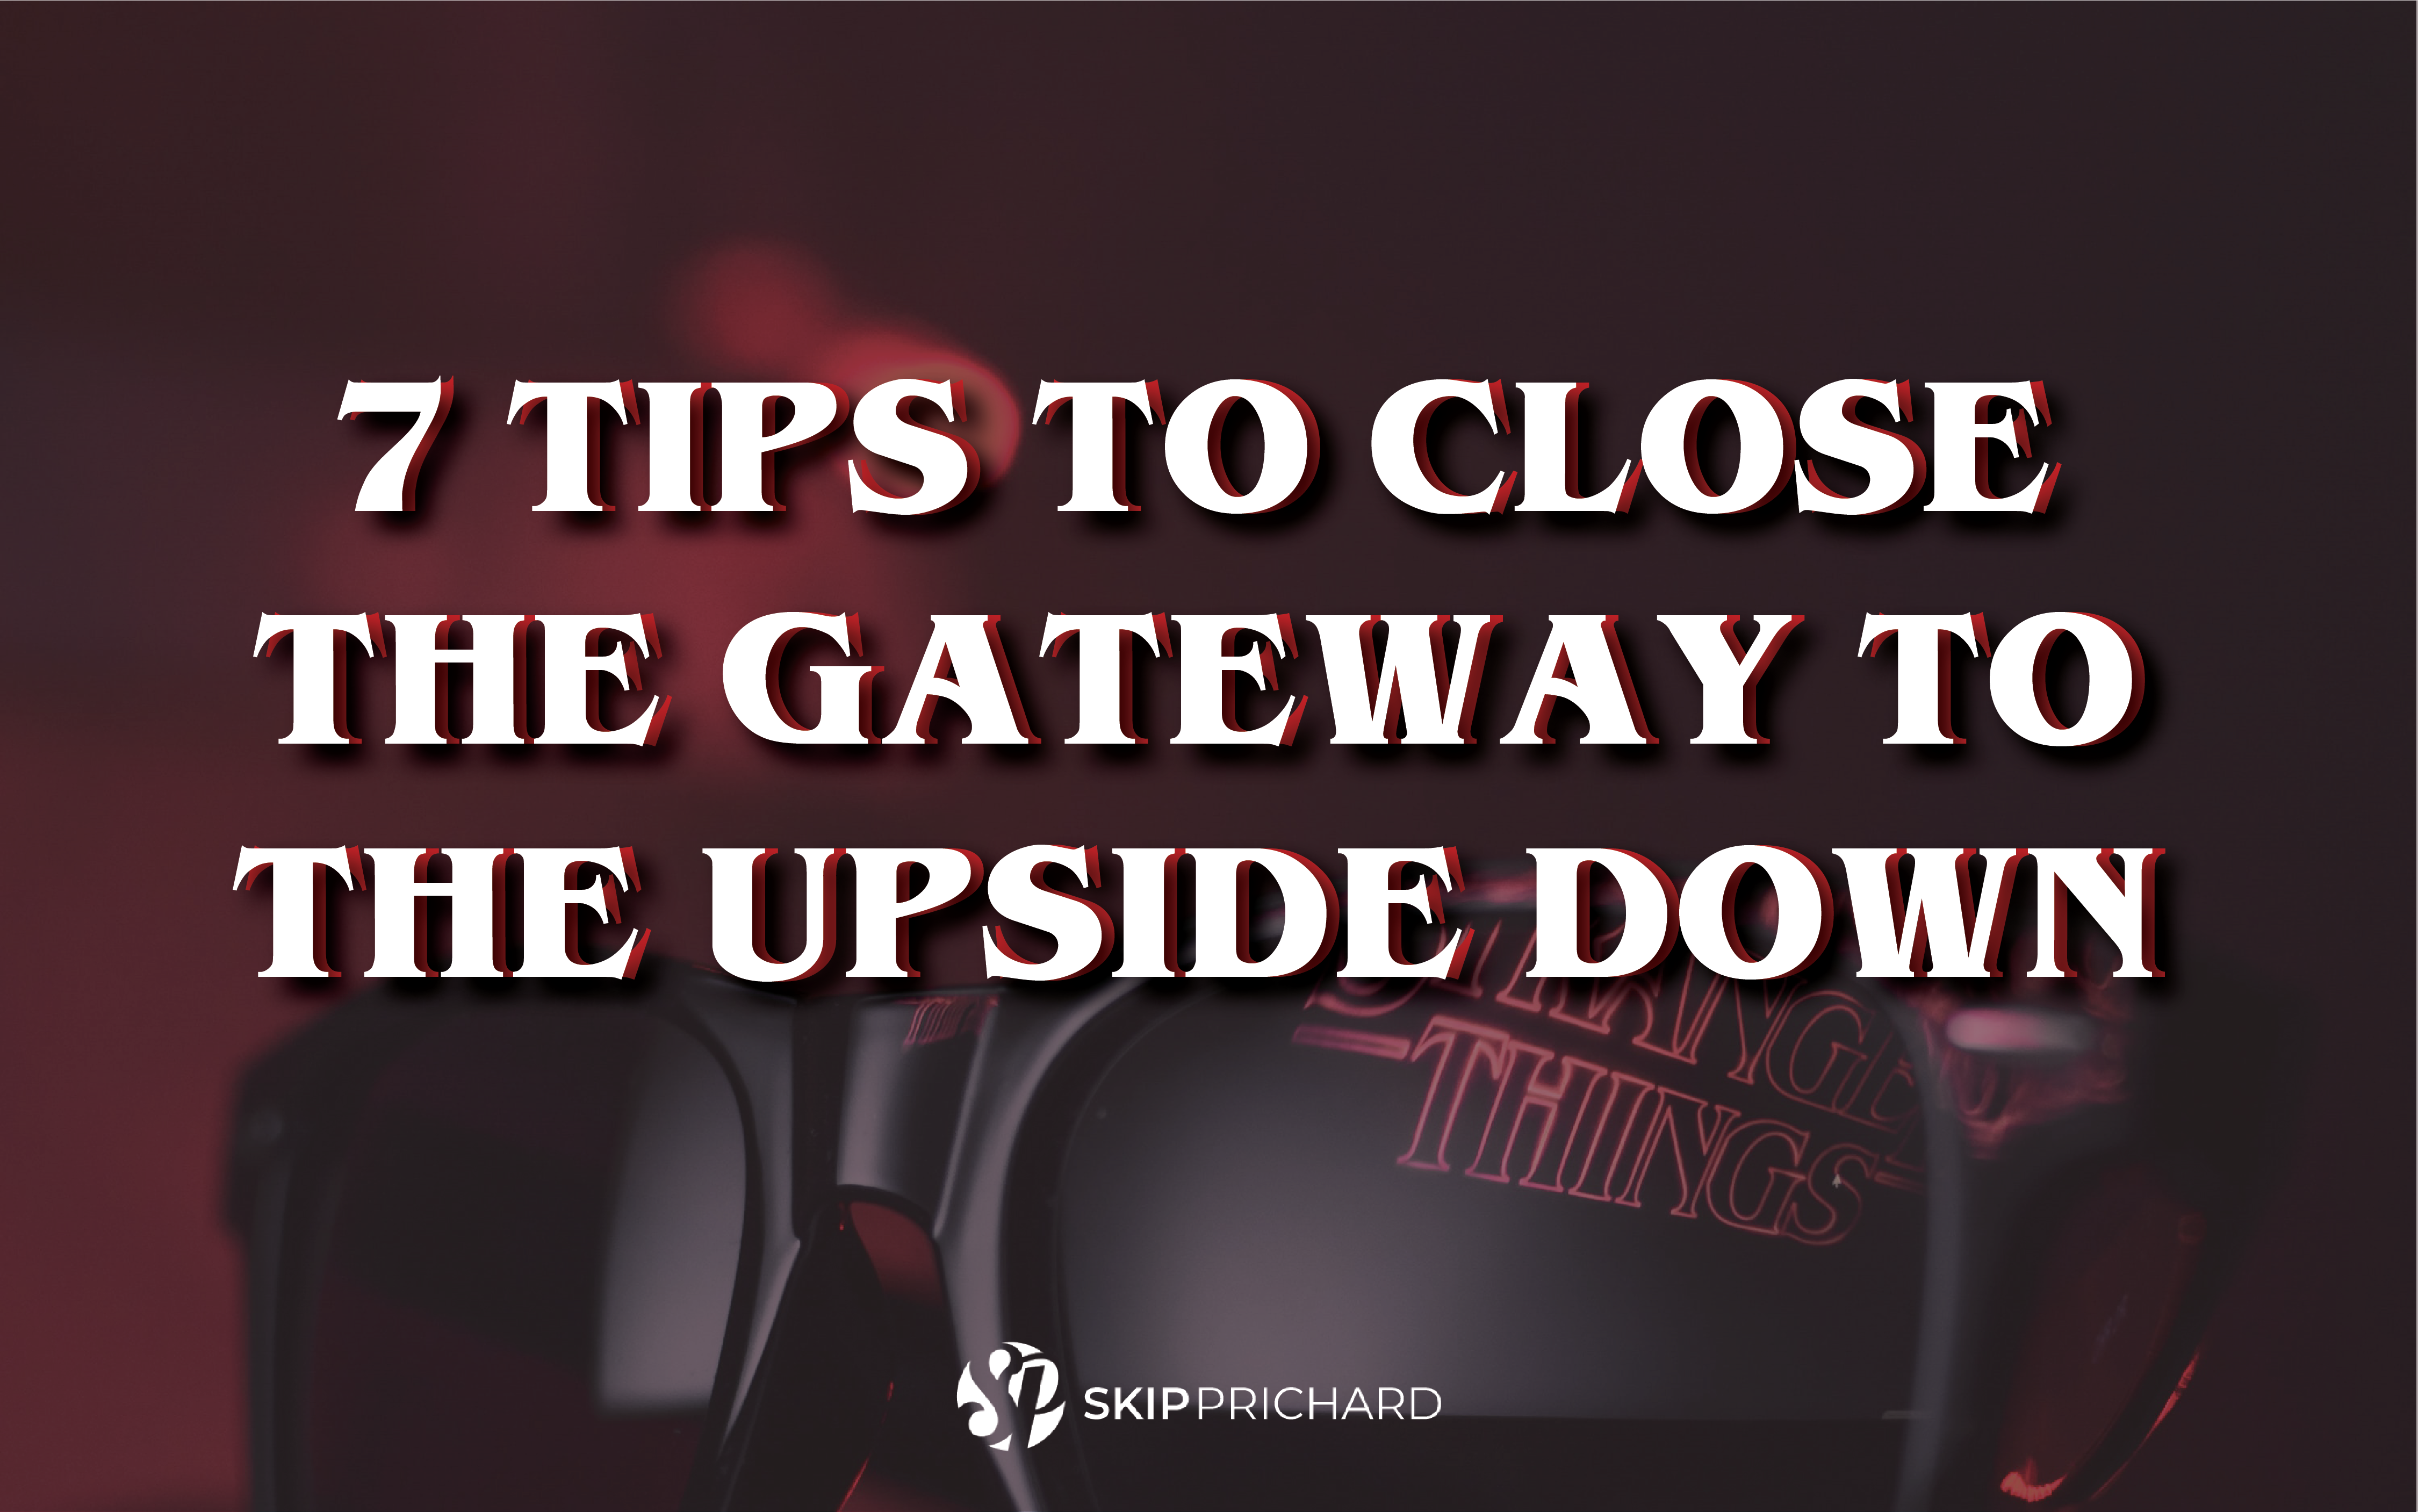 7 Tips to Close the Gateway to the Upside Down